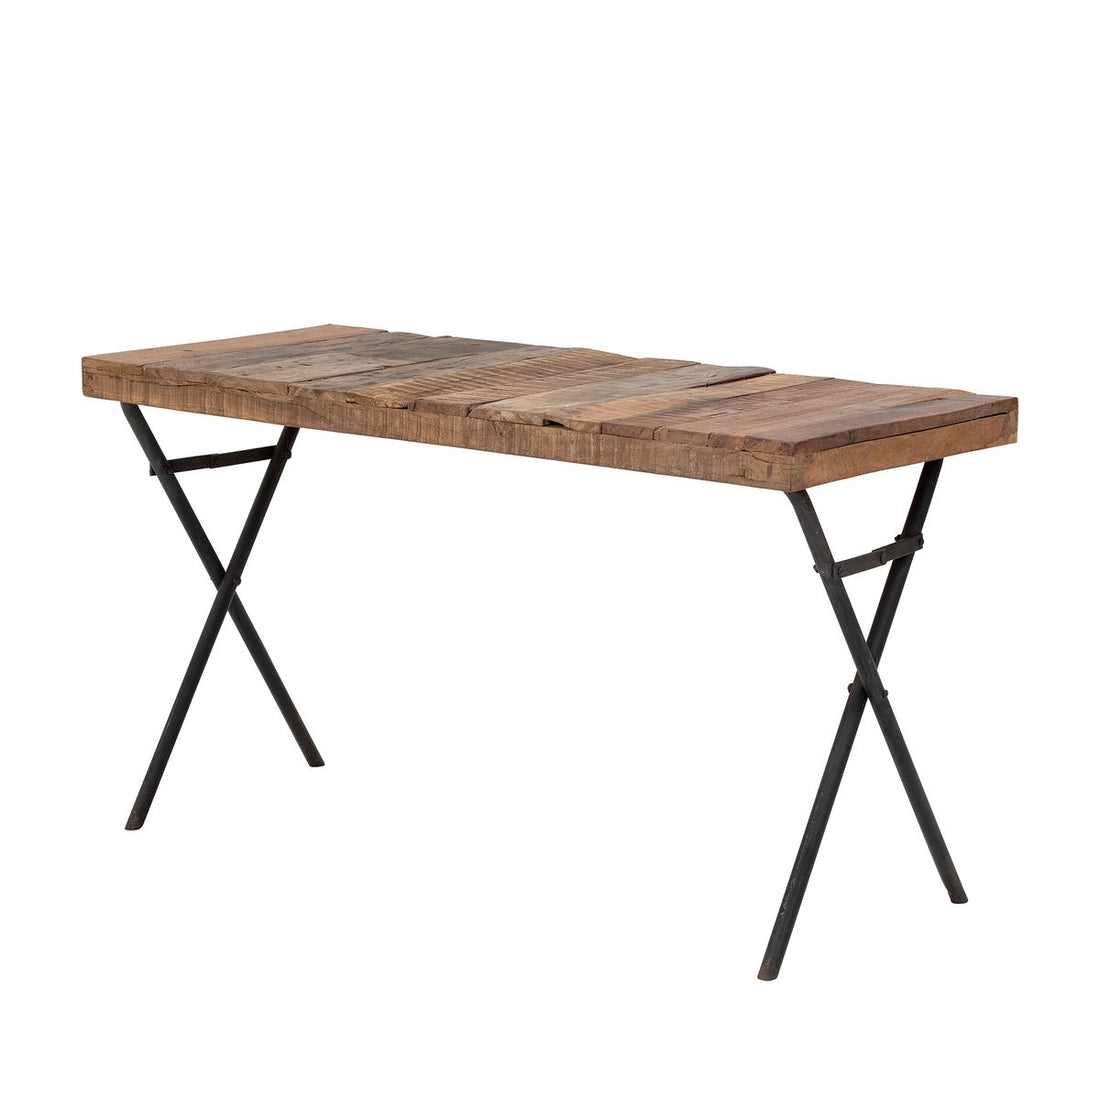 Creative Collection Mauie Dining Table, Nature, Recycled Wood